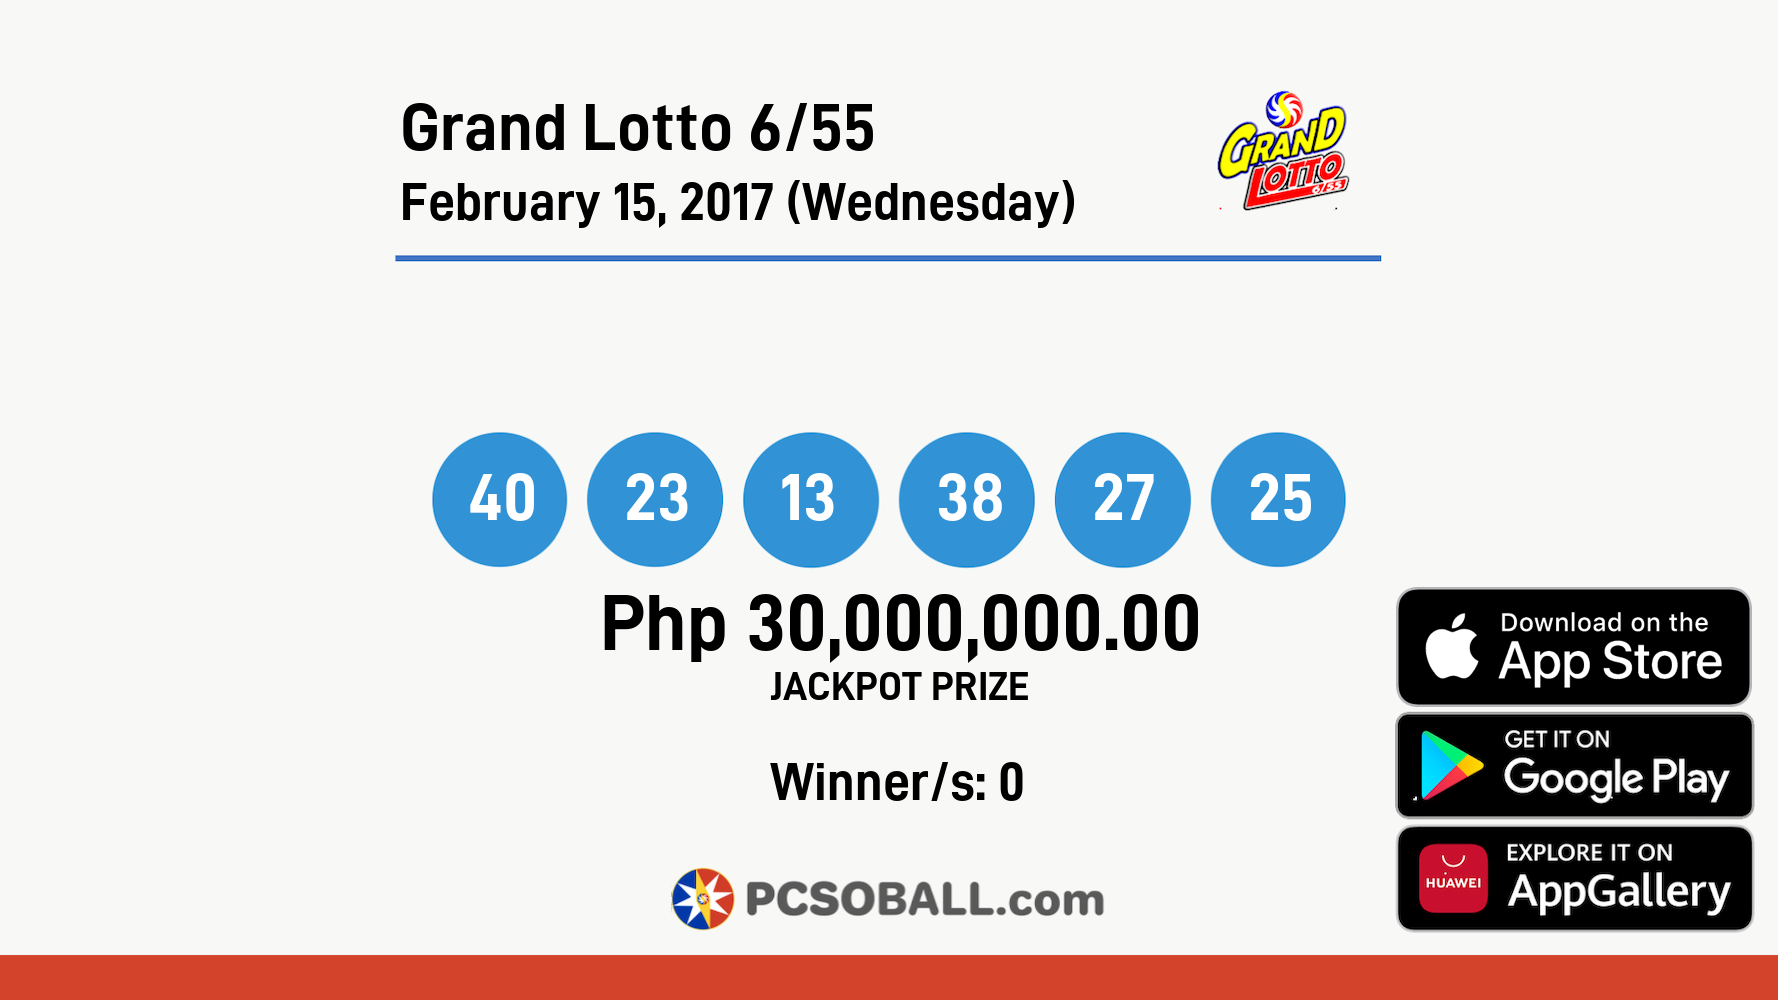 Grand Lotto 6/55 February 15, 2017 (Wednesday) Result